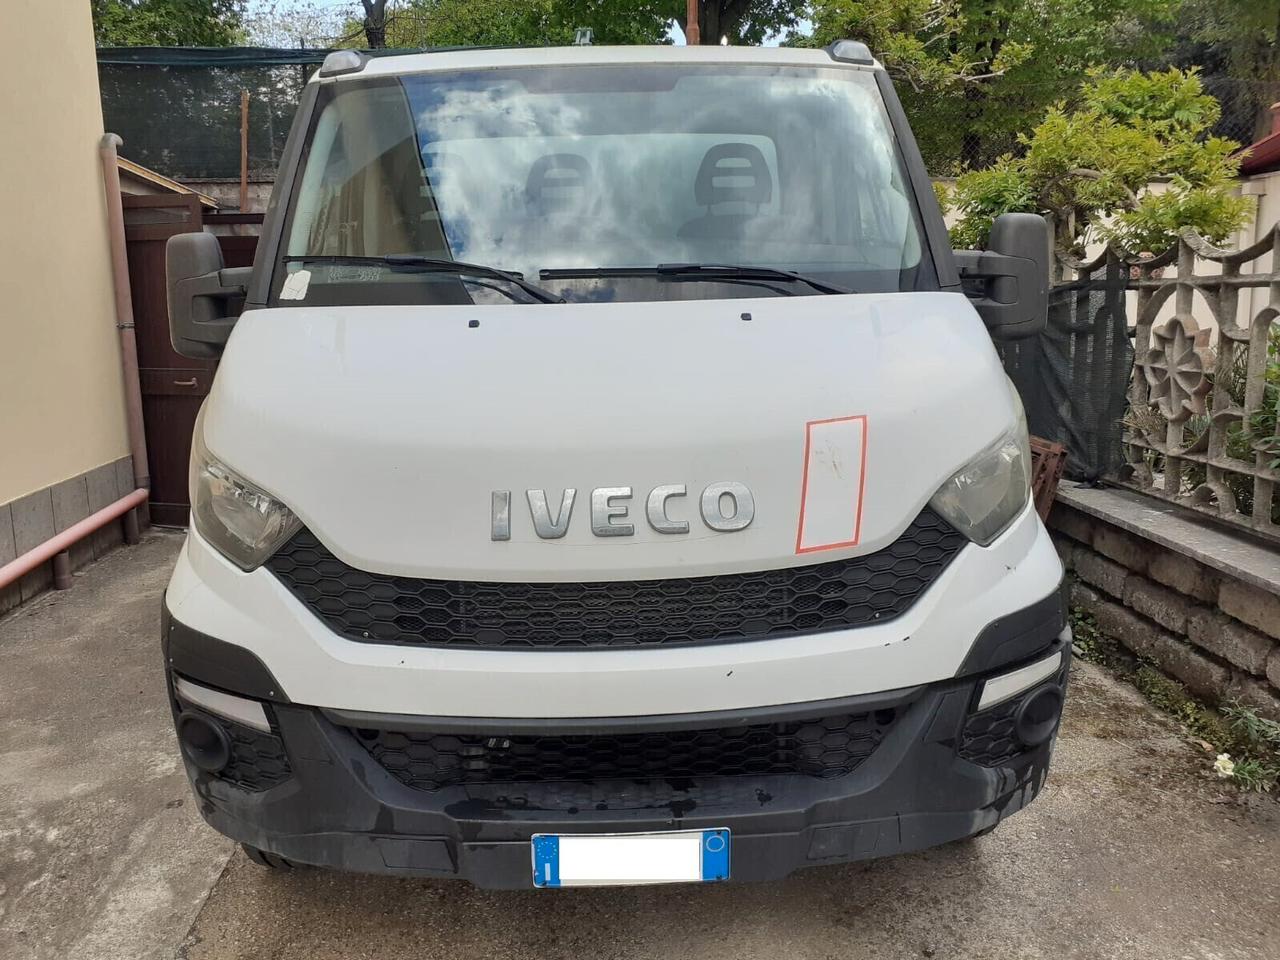 Iveco Daily 70CN METANO 3.0 CNG Passo 3450